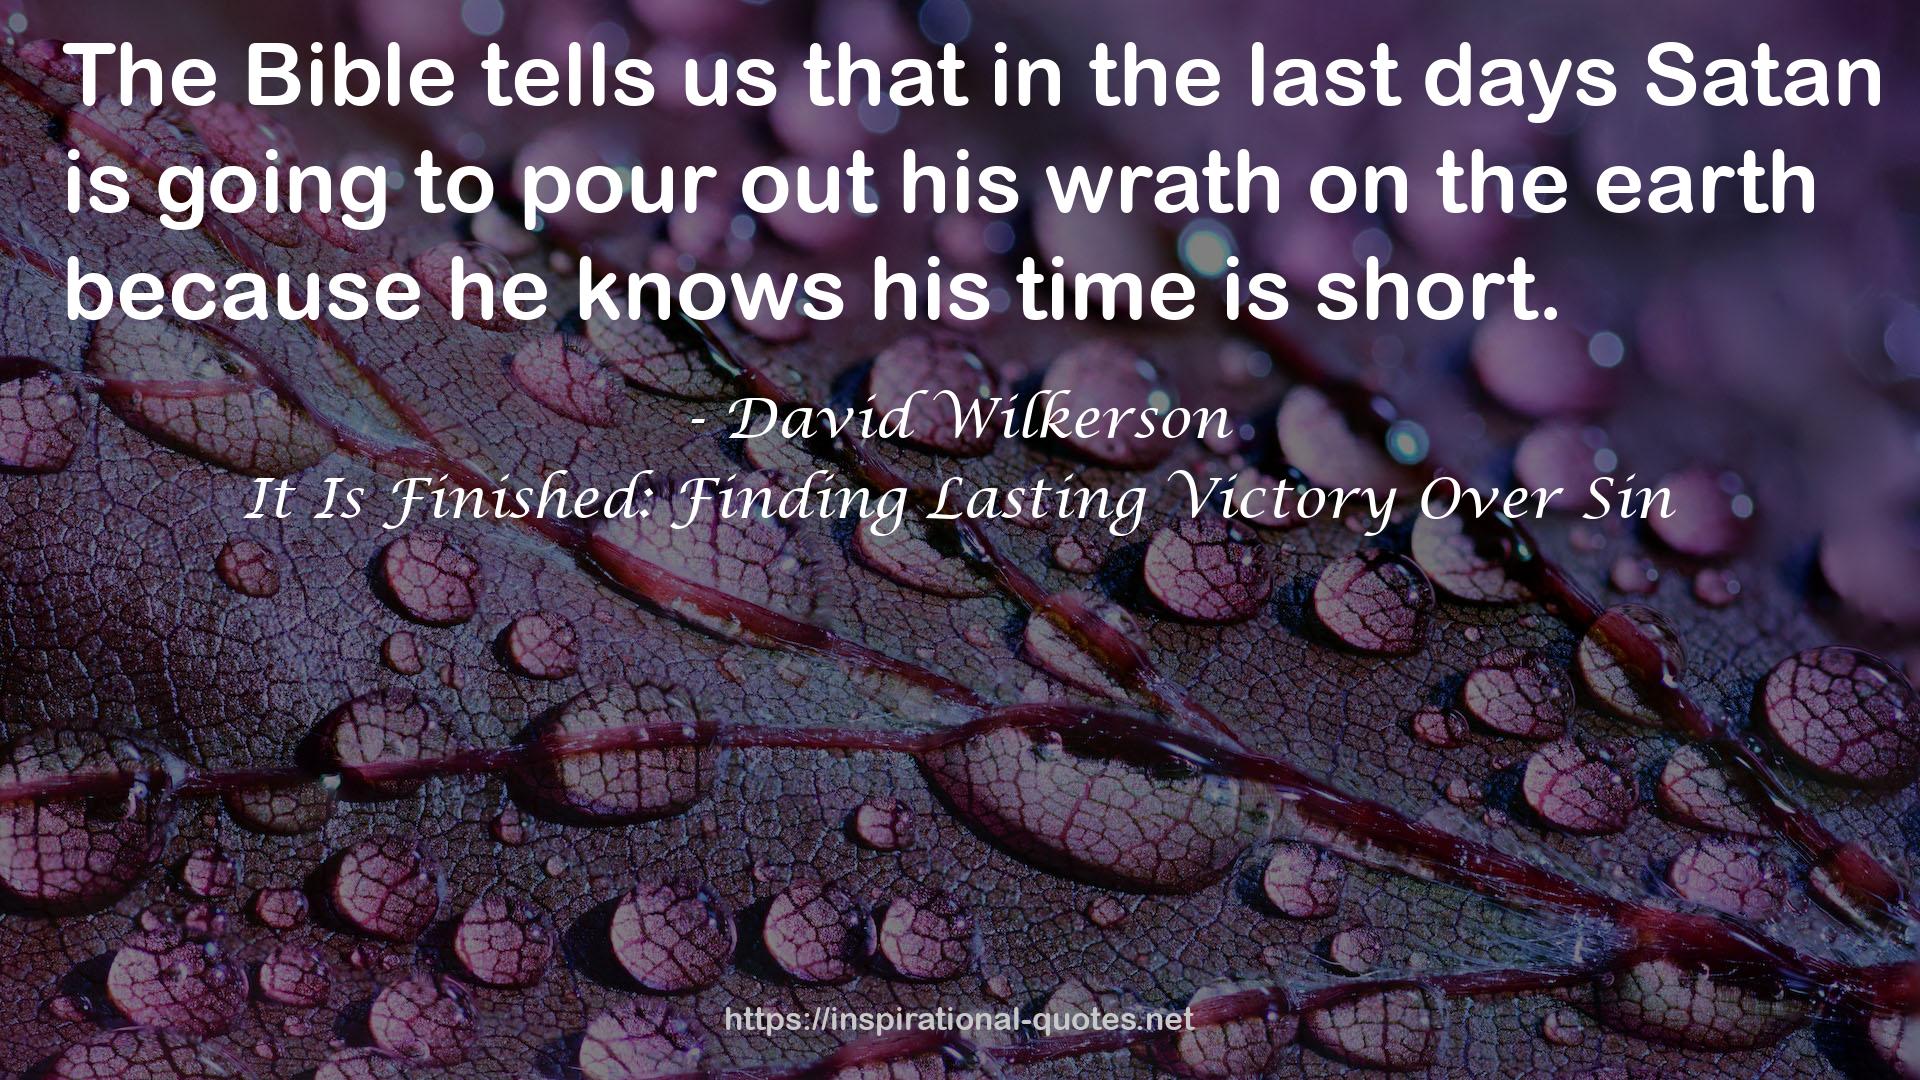 It Is Finished: Finding Lasting Victory Over Sin QUOTES